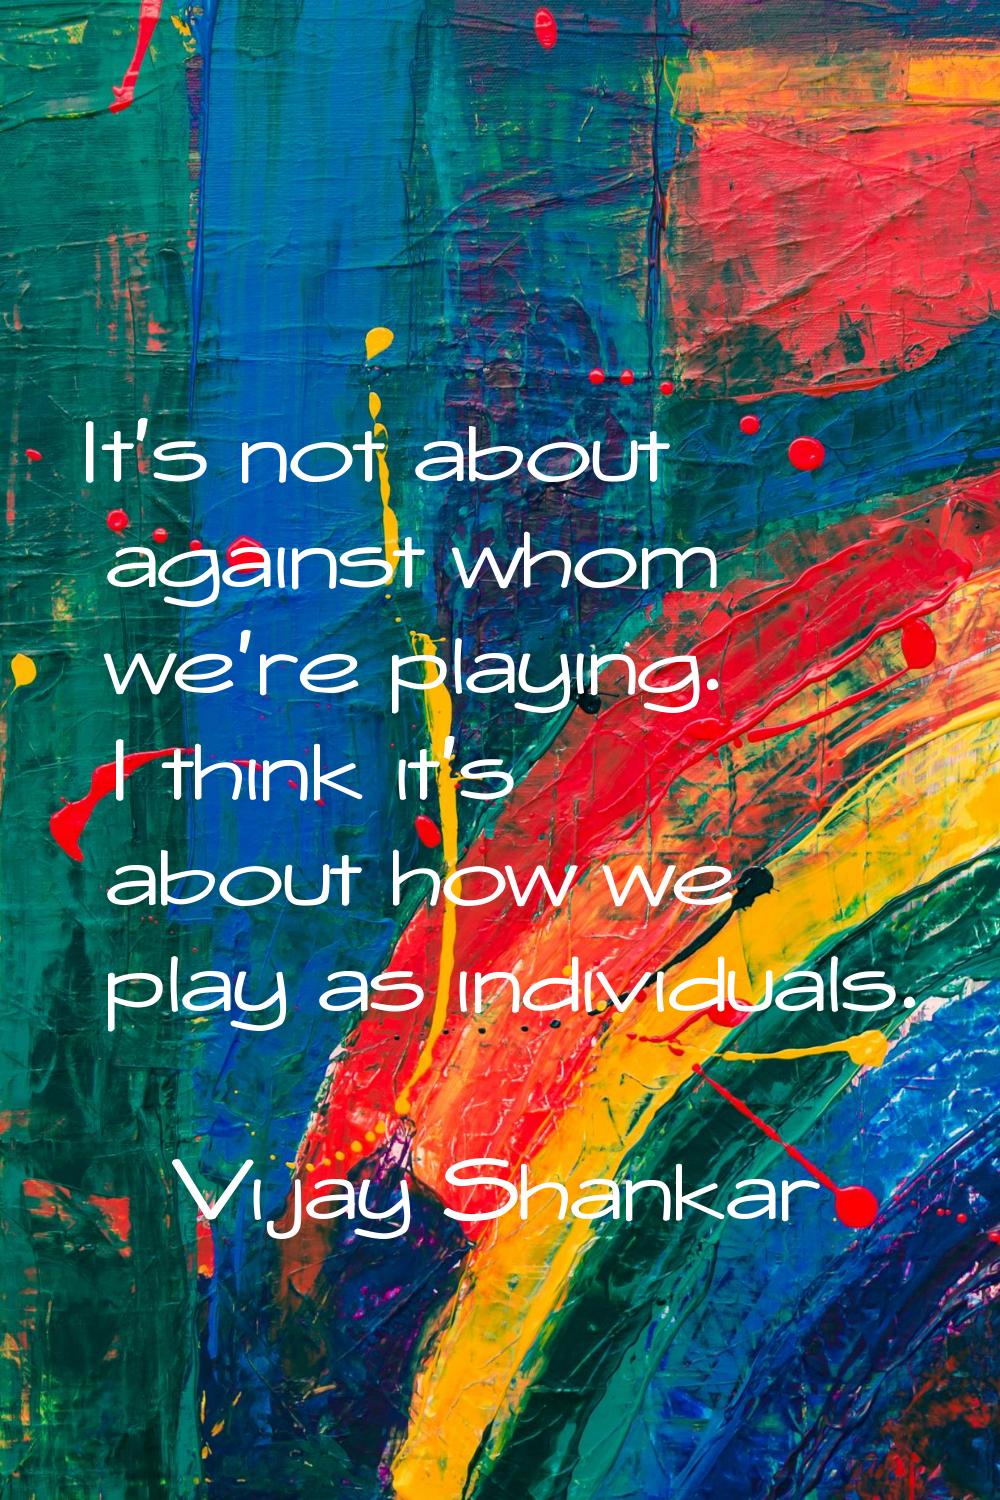 It's not about against whom we're playing. I think it's about how we play as individuals.